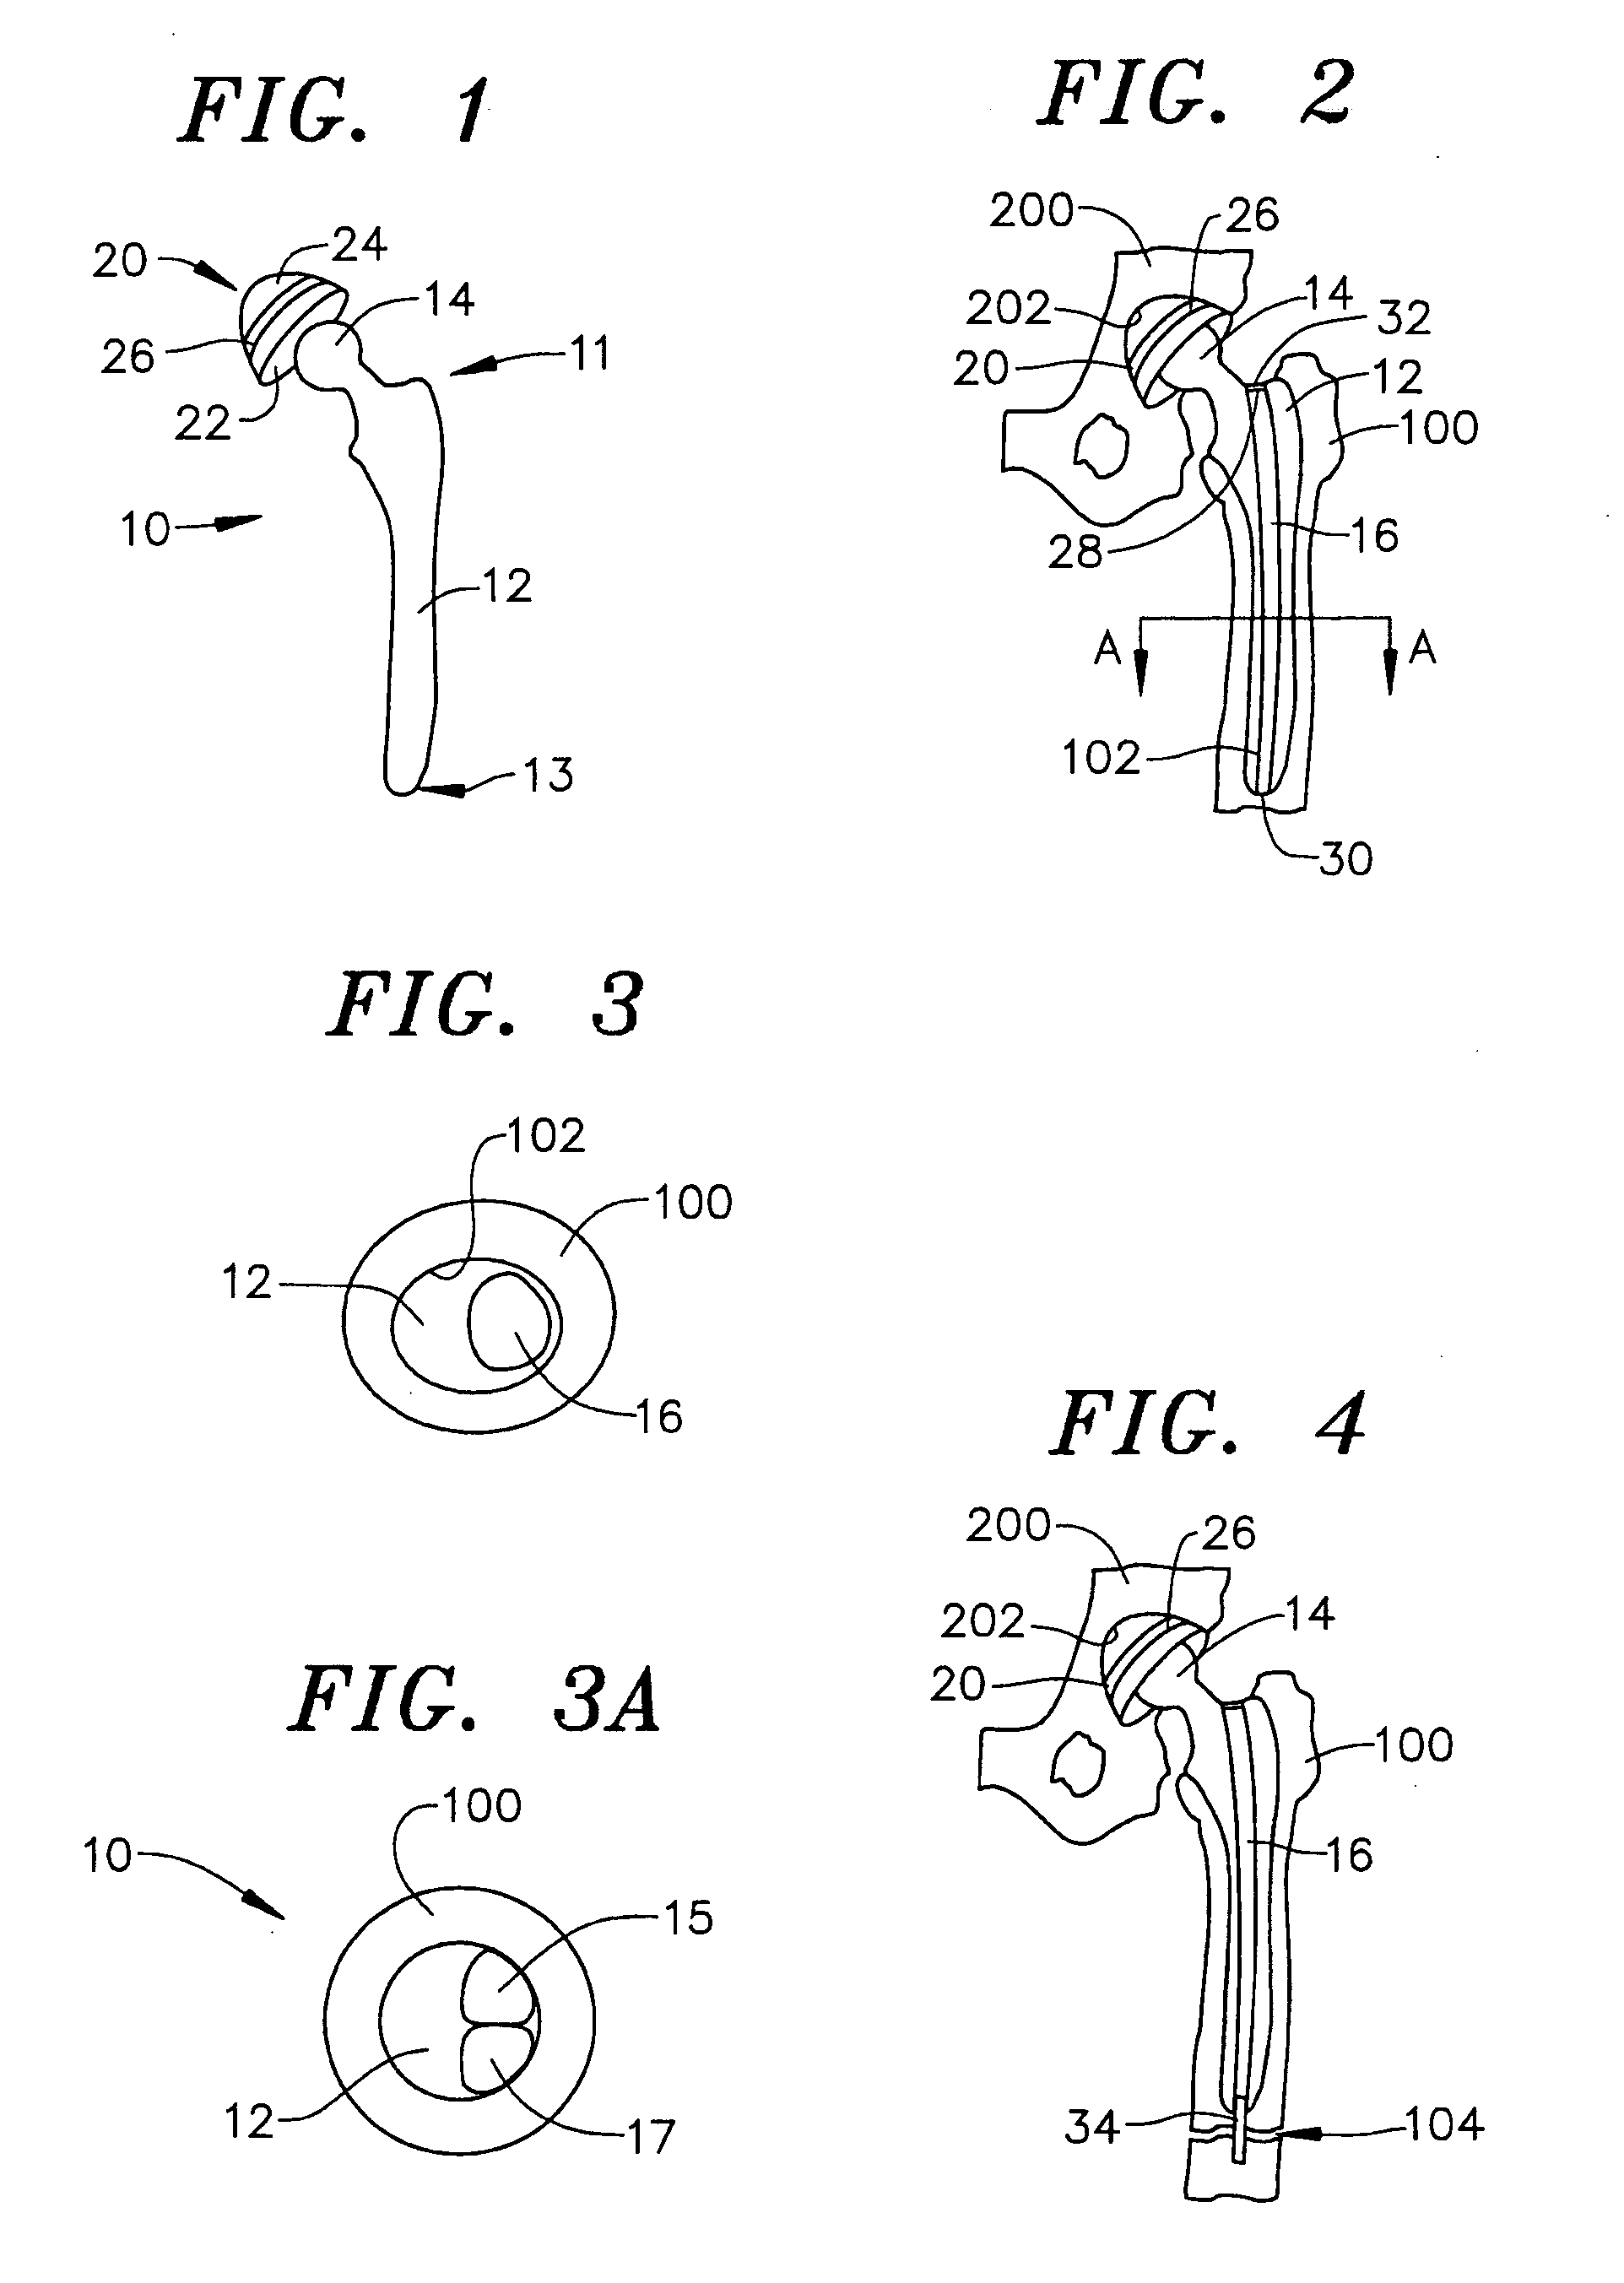 Cannulated femoral hip implant apparatus